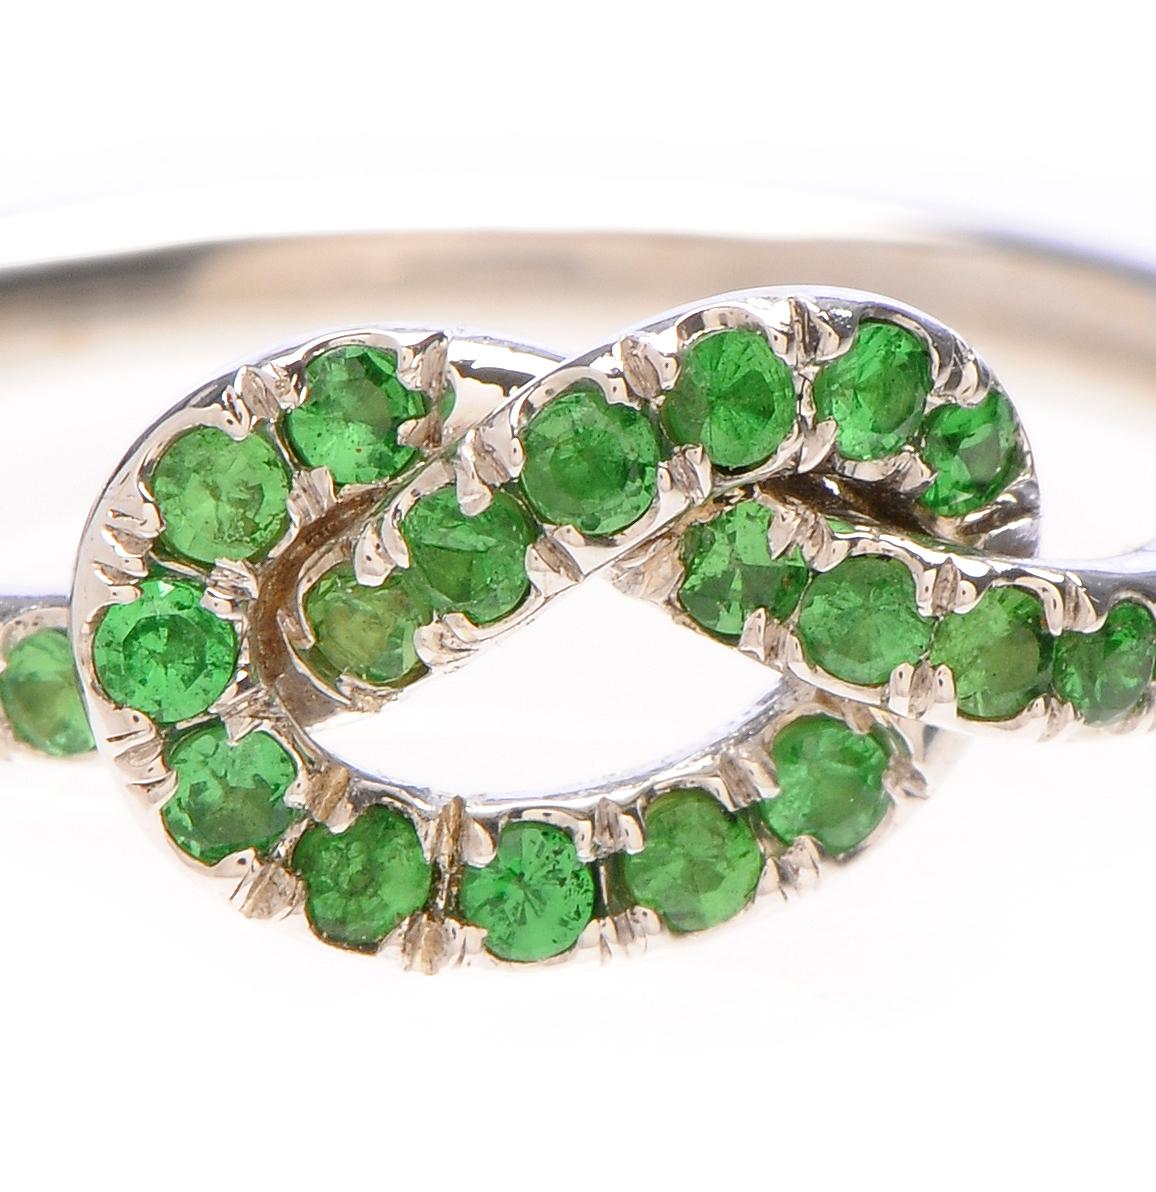 Signature Love Knot ring, and the unique Tsavorite stones are what makes this really special. 

18k white gold 
engraved 